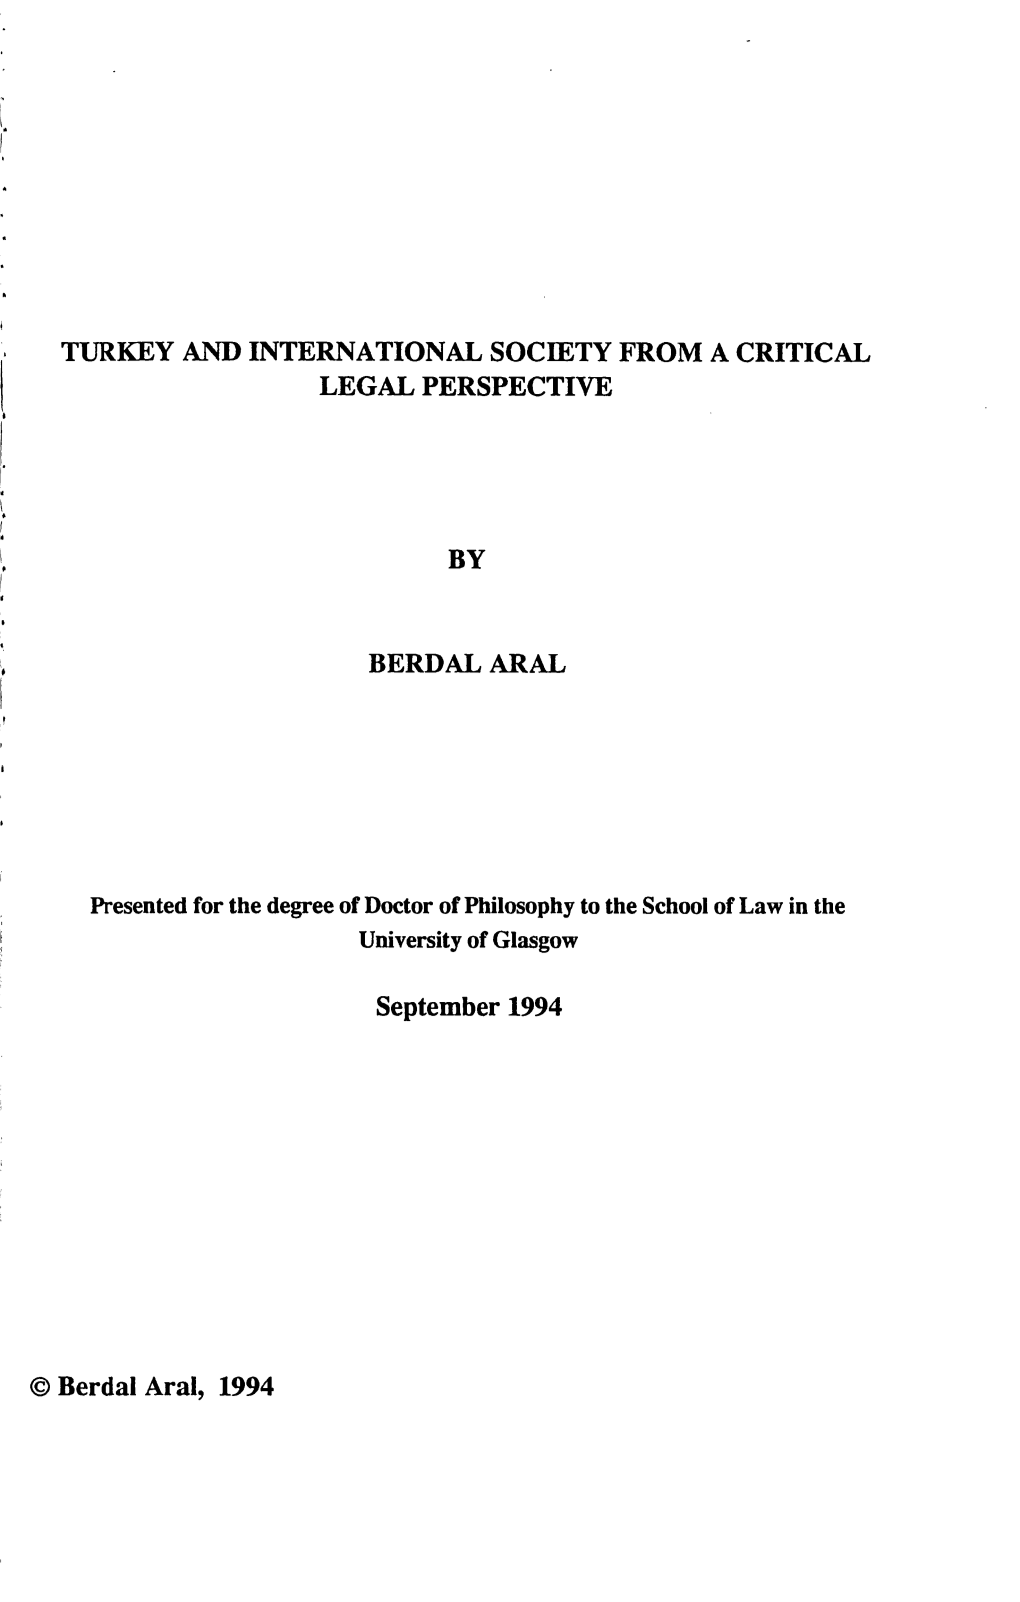 Turkey and International Society from a Critical Legal Perspective